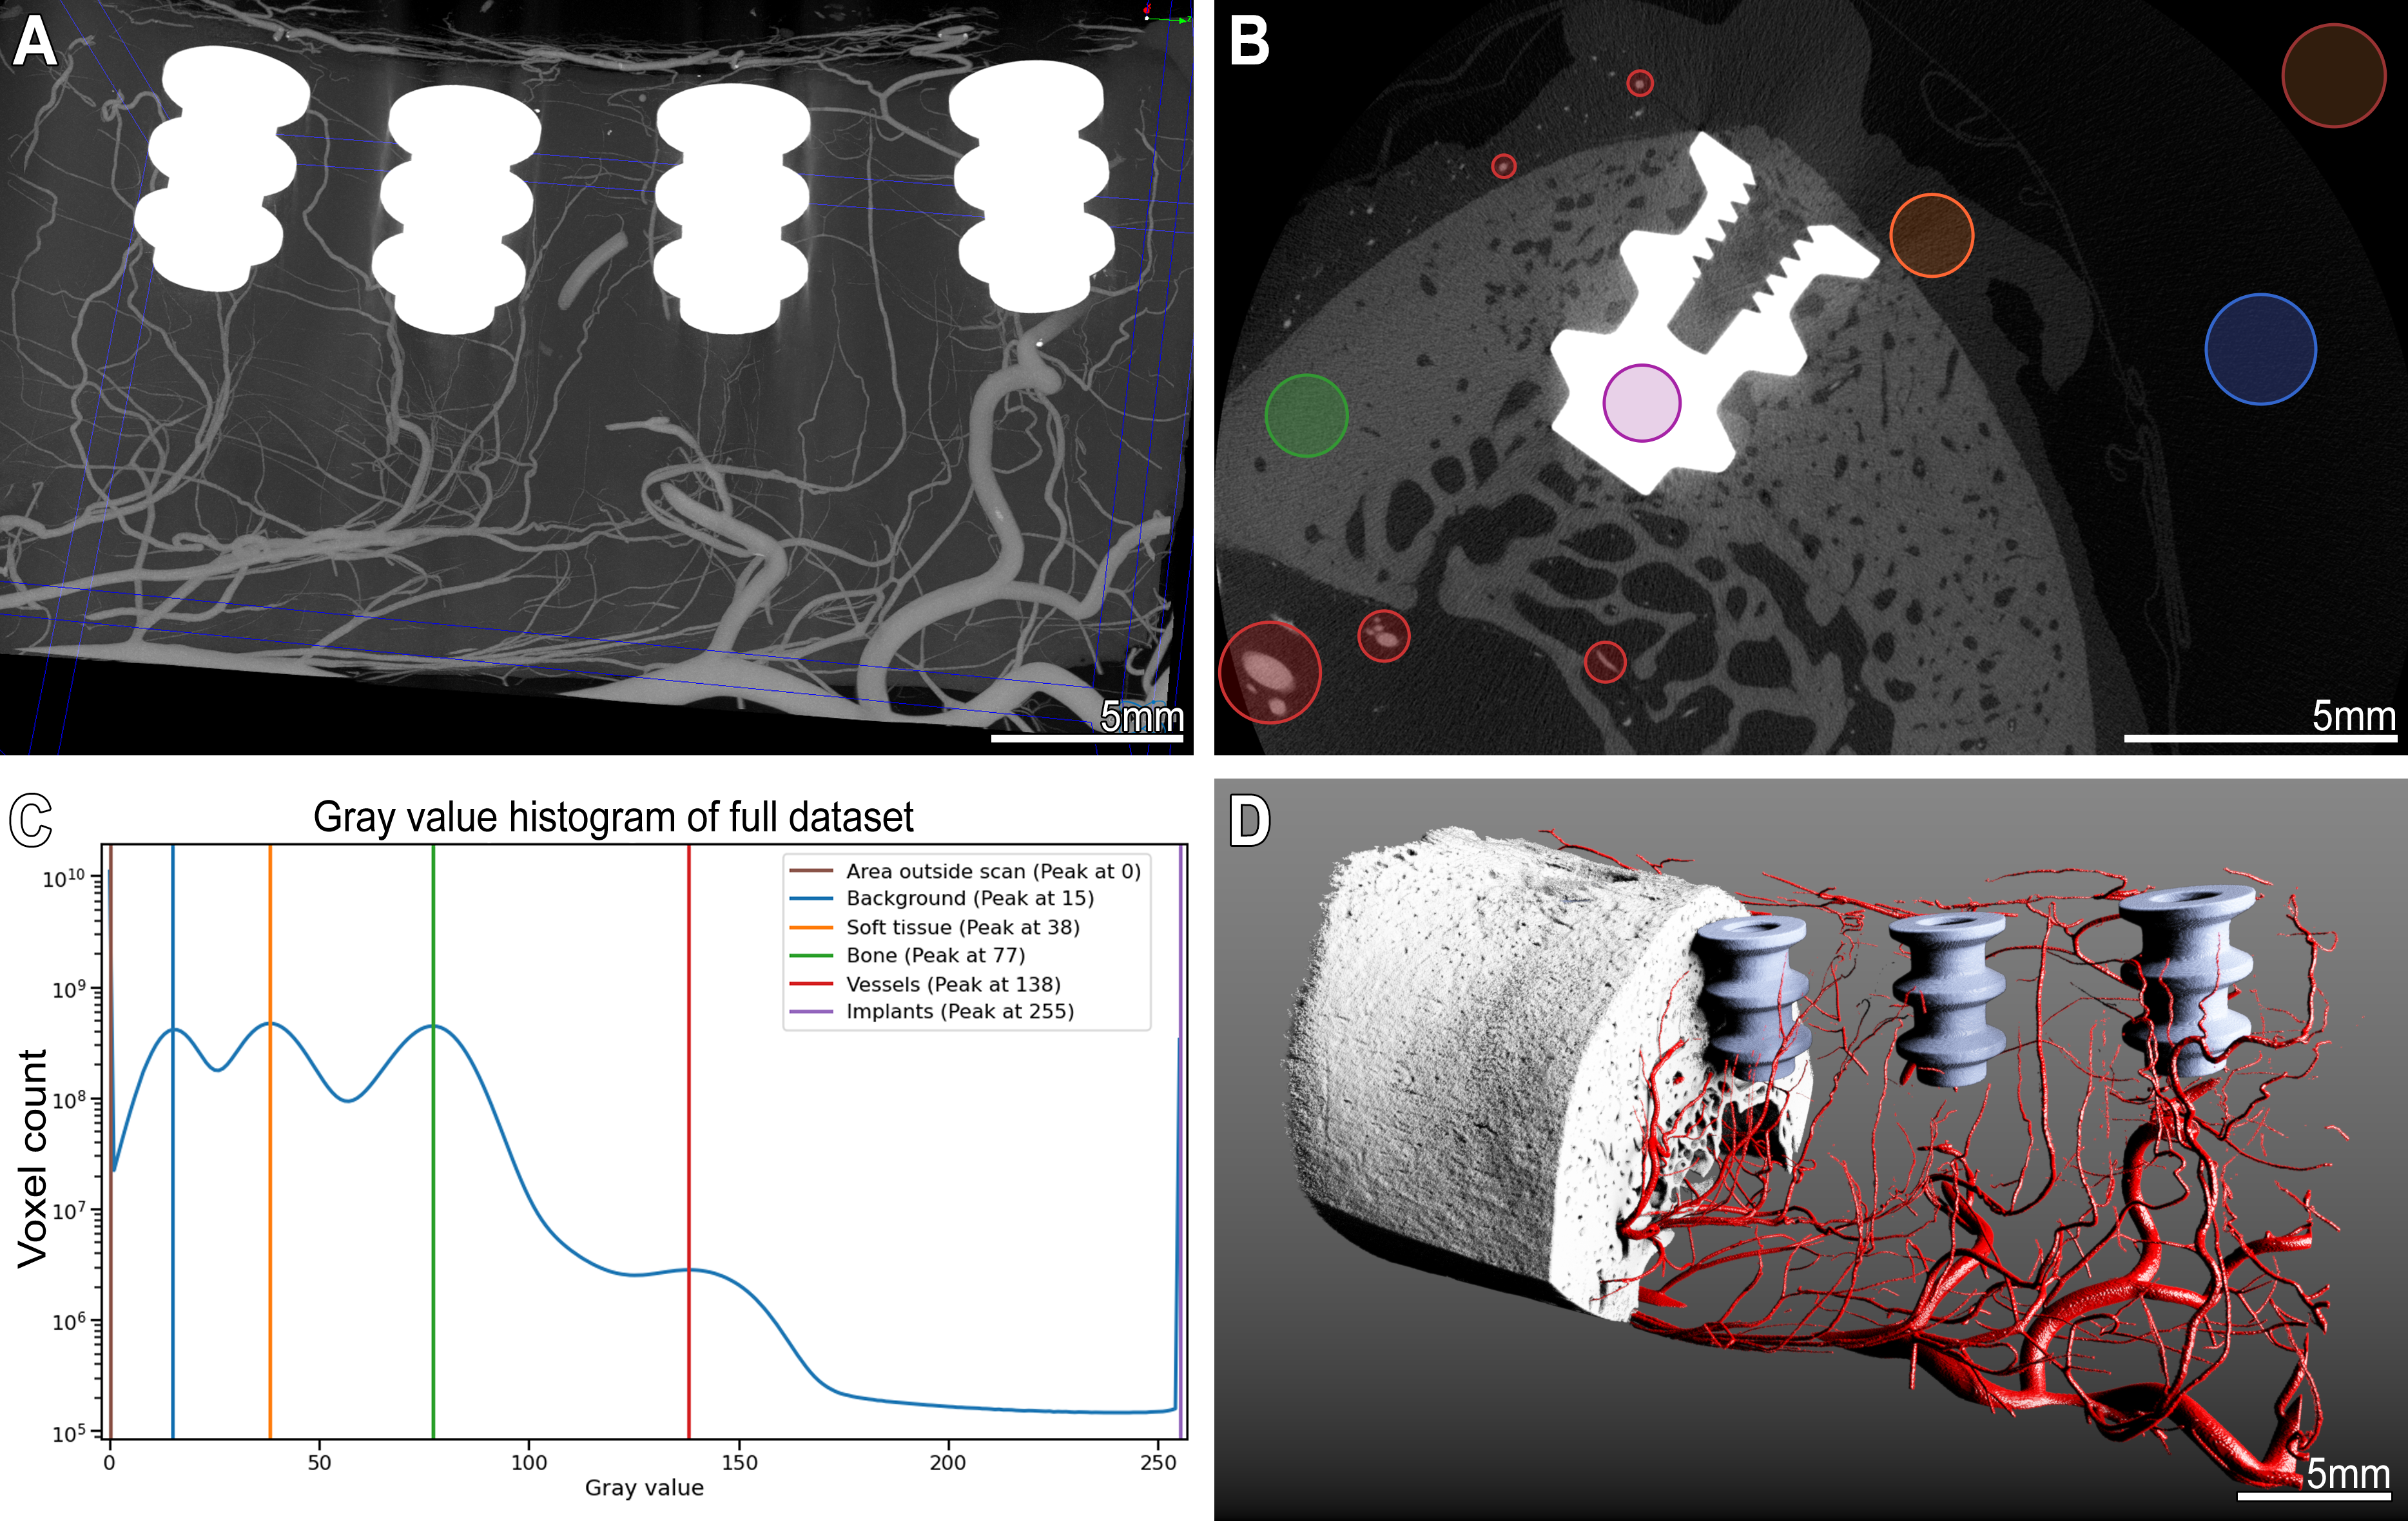 Figure 6: microangioCT of the peri-implant vasculature of a minipig mandibula. Panel A: Maximum intensity projection image of the minipig mandible dataset with 4 metal implants and µAngiofil-perfused vessels. Panel B: virtual transversal section through the dataset showing an implant within the mandible. The colored circles mark structures with different gray values ranges. Corresponding peaks with color legend are marked on the histogram in panel C. Such differences in gray levels allow a straightforward segmentation of the structures of interest as displayed in the 3D visualization in panel D.